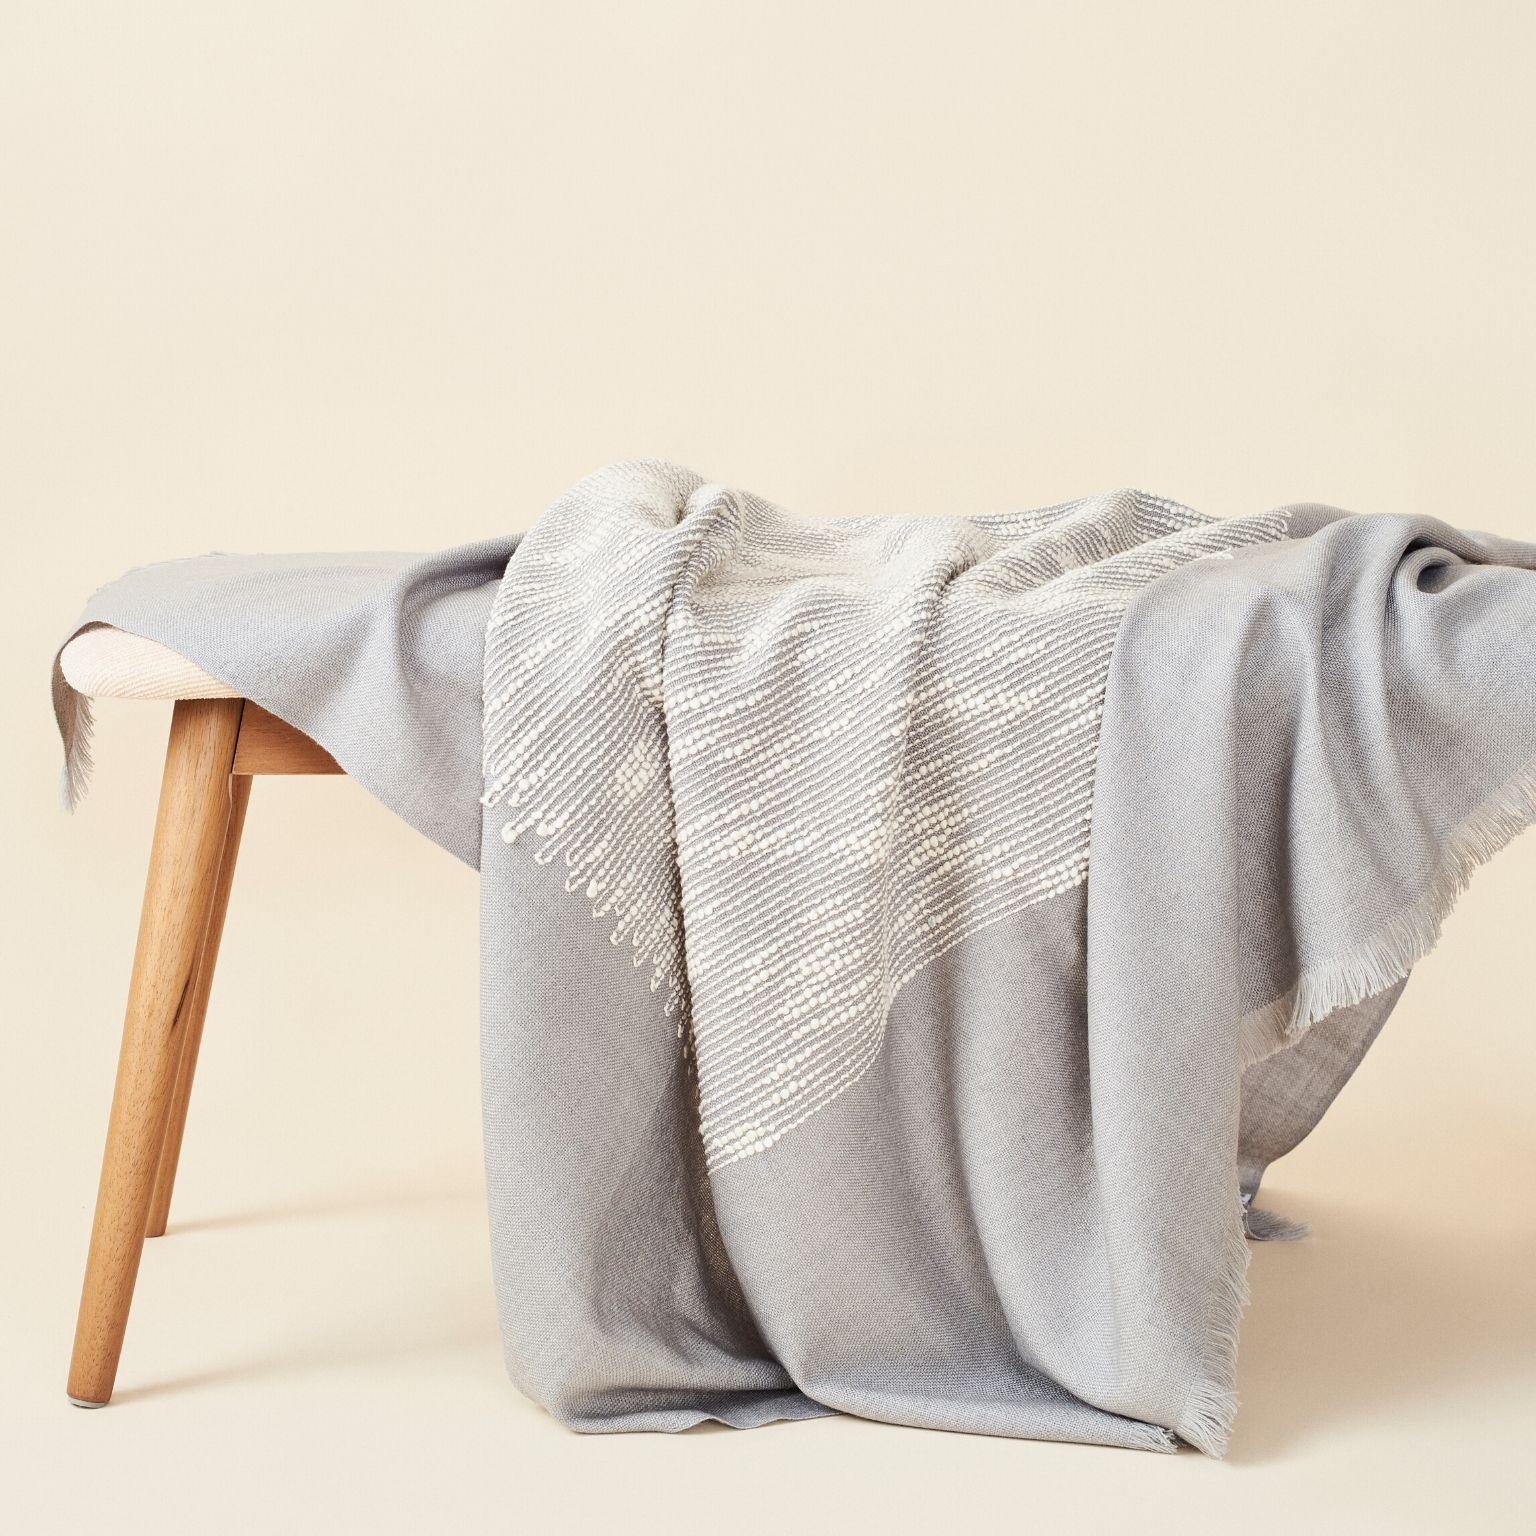 Custom design by Studio Variously, FLO grey throw / blanket is a beautifully handwoven and carefully hand embroidered piece by master weavers in Nepal , and dyed entirely with earth-friendly certified Swiss dyes. A sustainable design brand based out